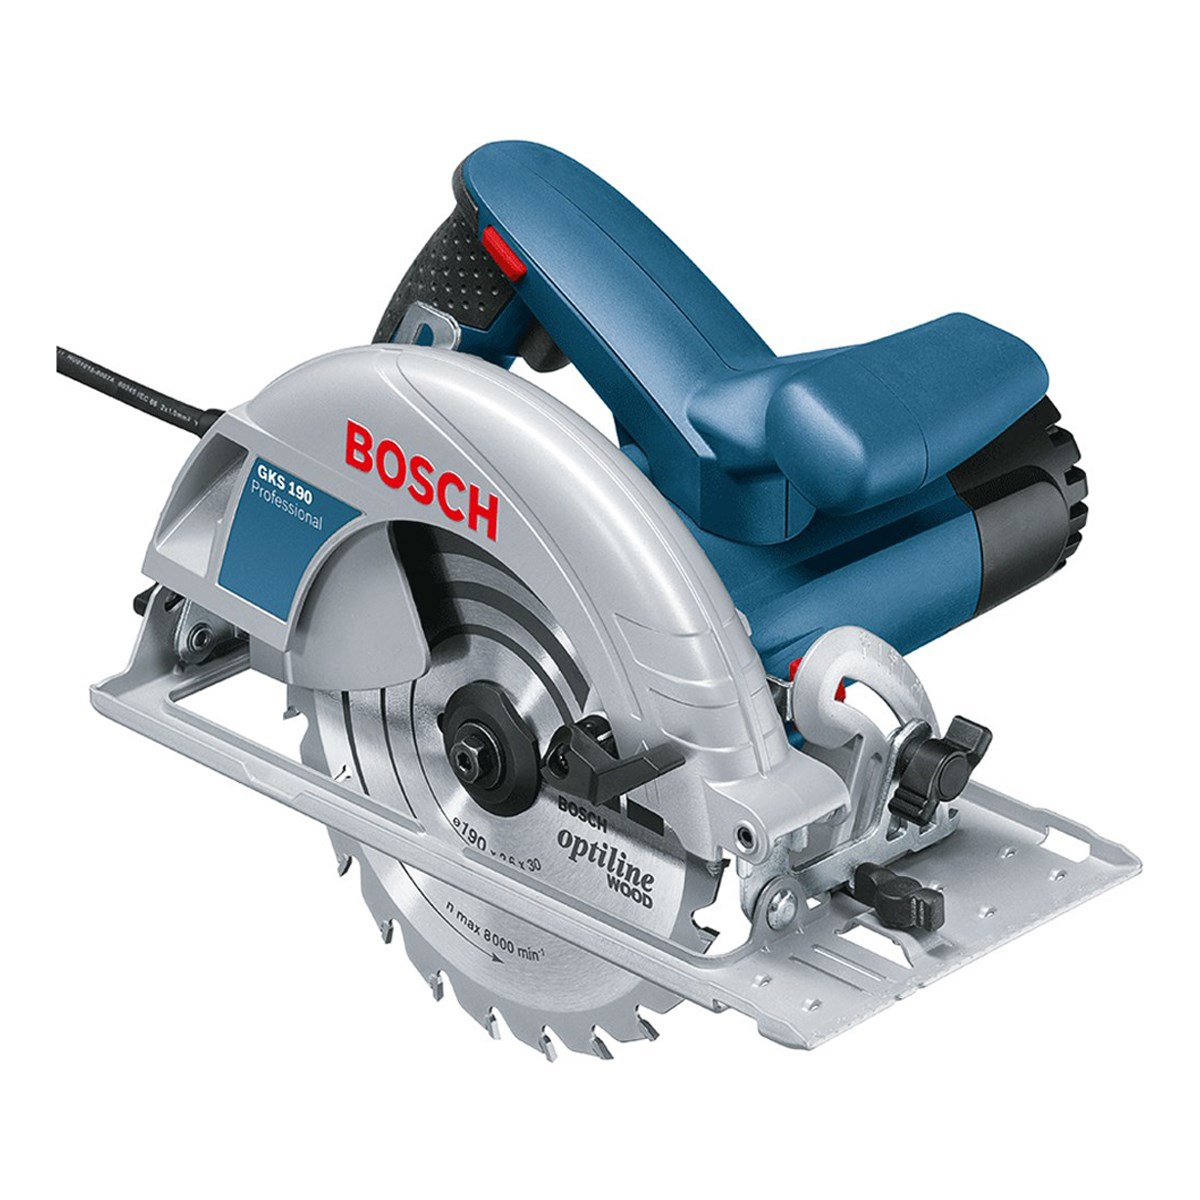 BOSCH Professional GKS 190 Daire Testere - 0601623000